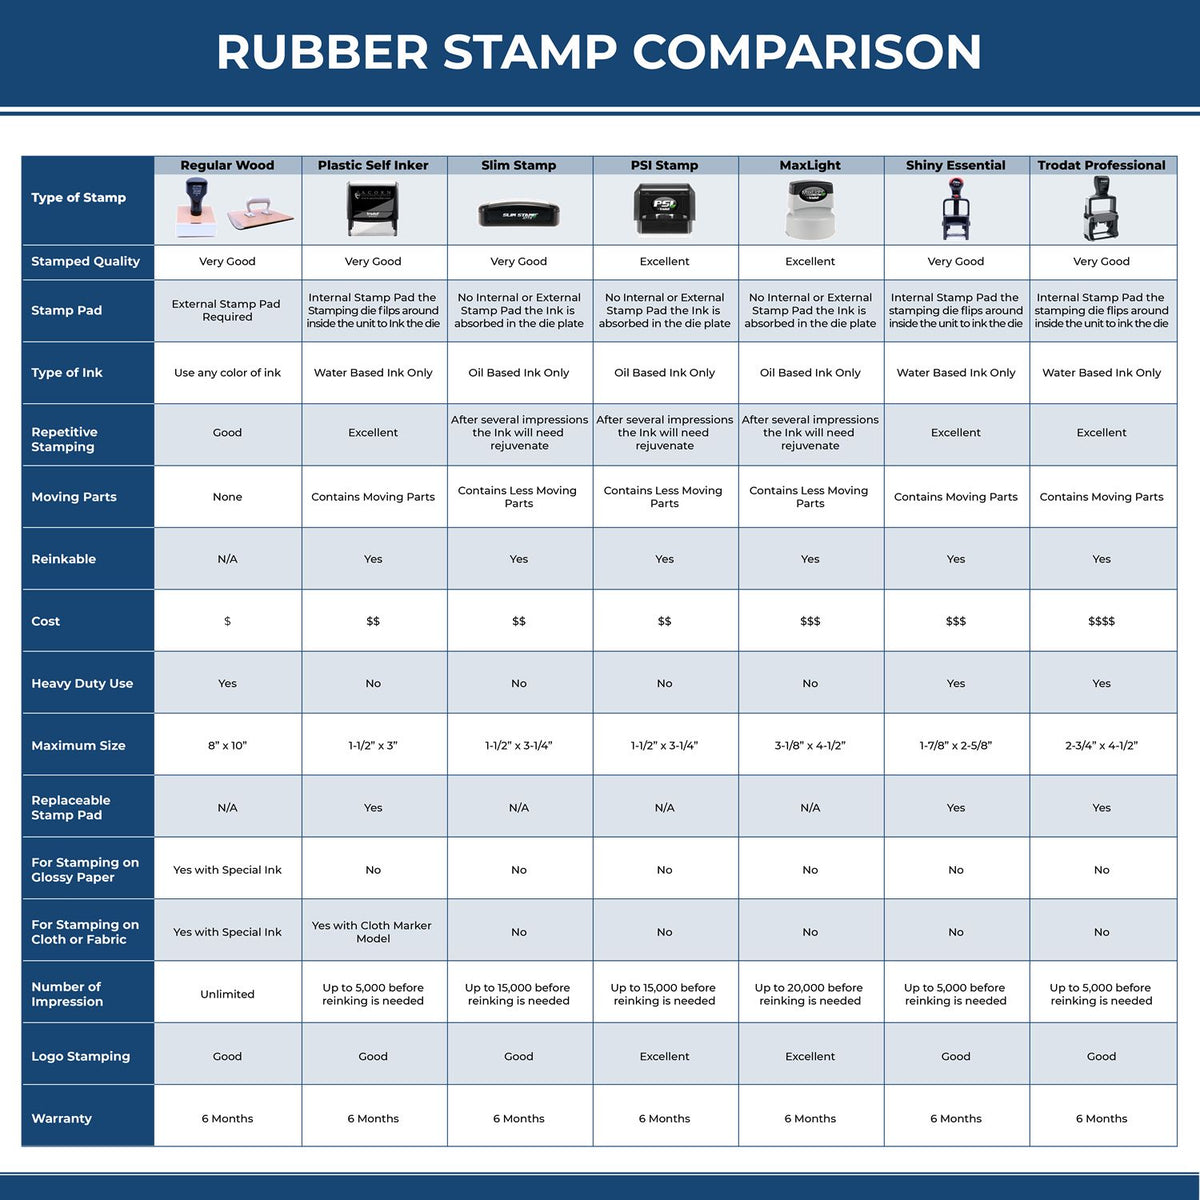 A comparison chart for the different types of mount models available for the PSI Arkansas Notary Stamp.